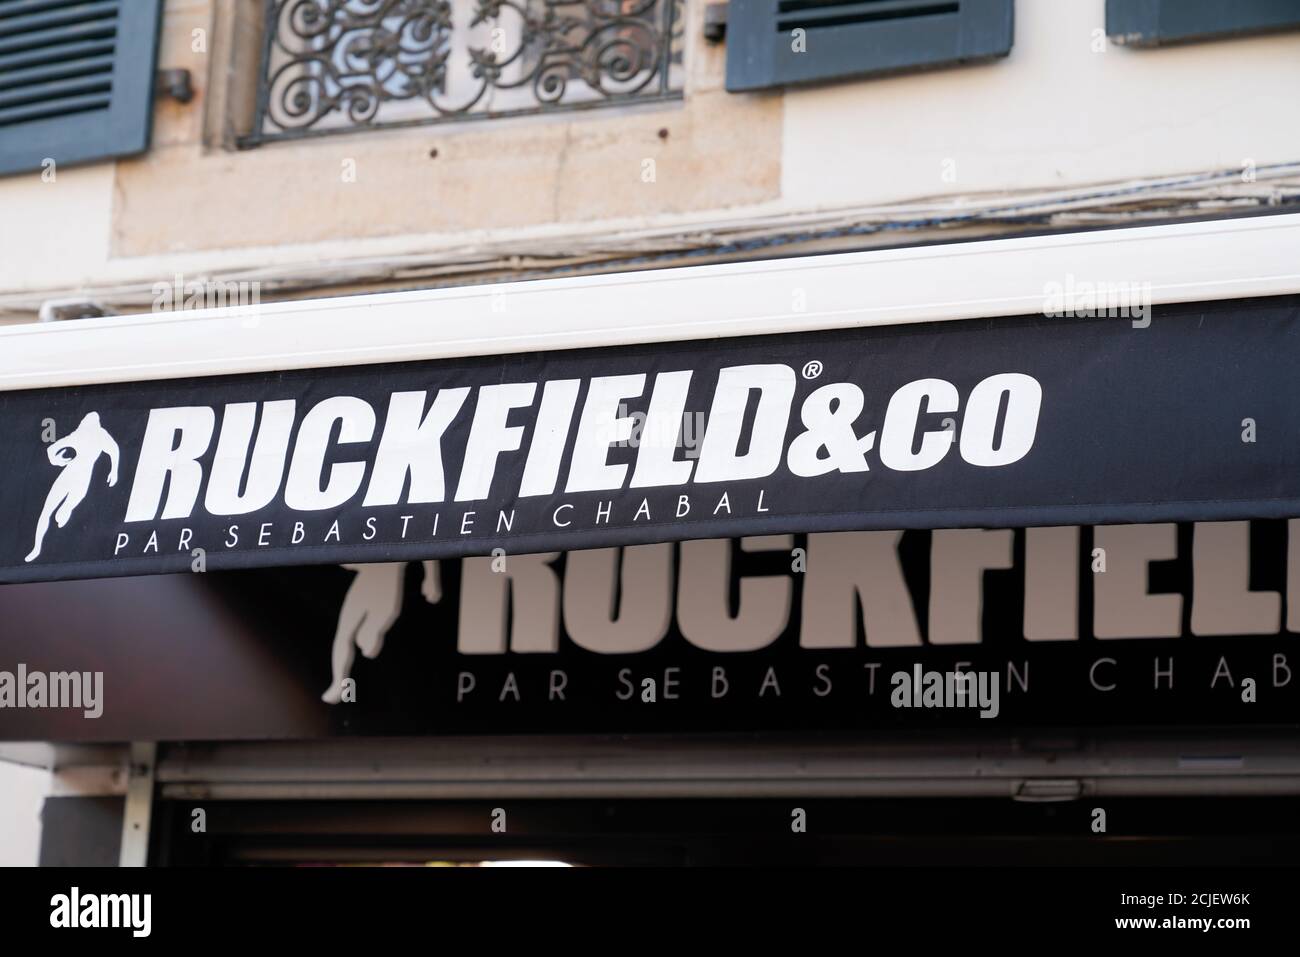 Bordeaux , Aquitaine / France - 09 01 2020 : ruckfield & co by sebastien Chabal logo text and shop sign of rugby sporty clothing fashion store Stock Photo